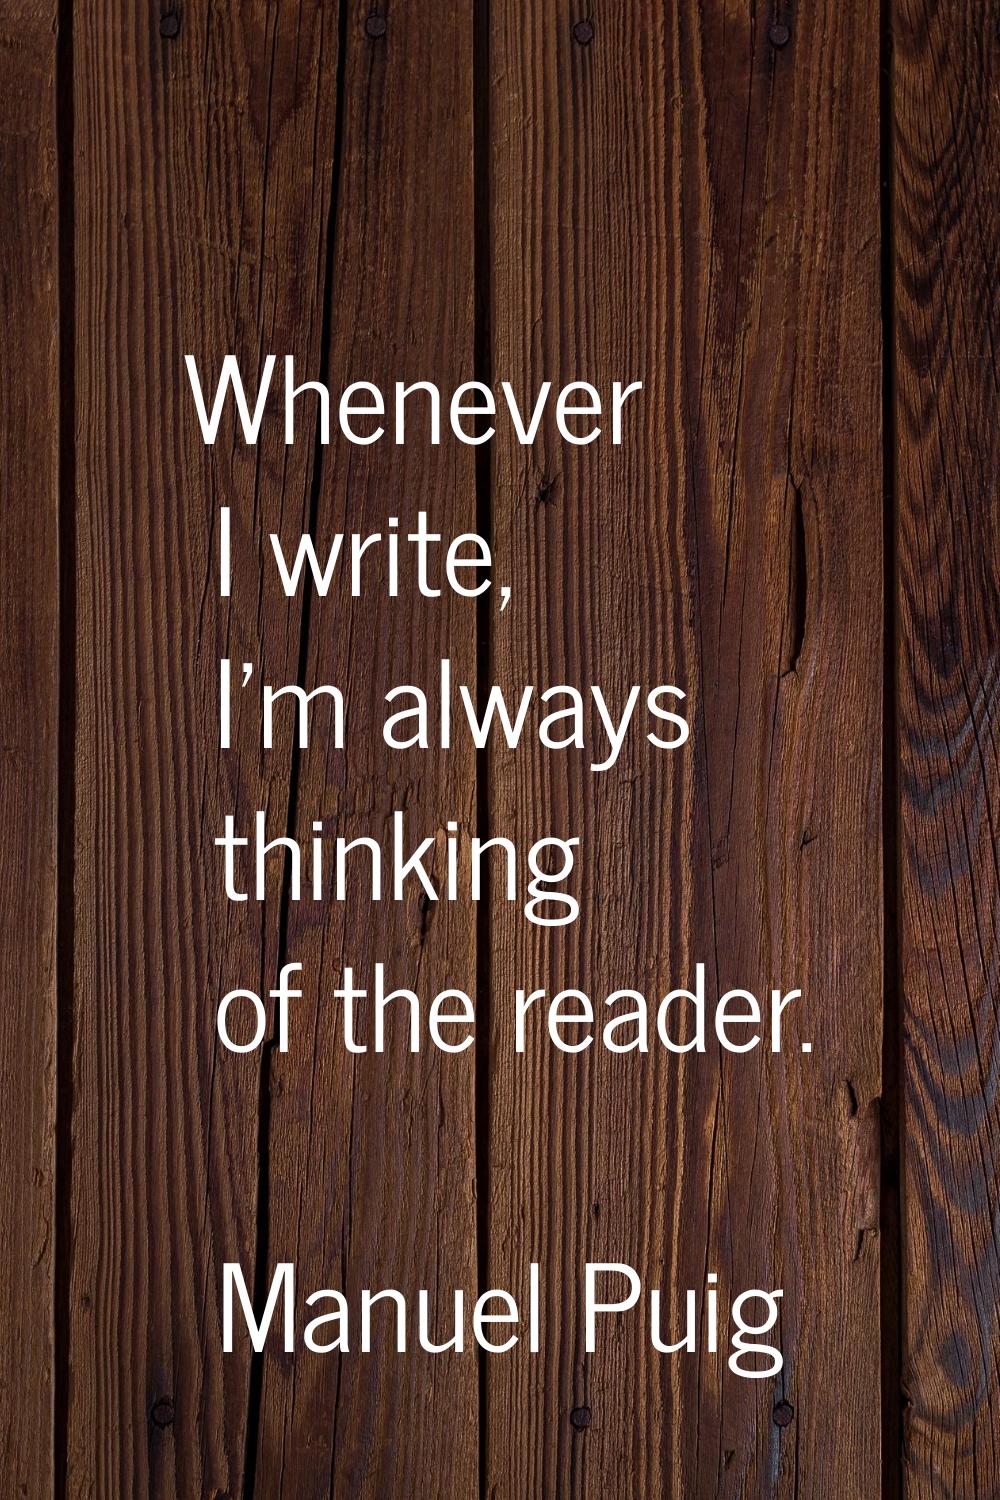 Whenever I write, I'm always thinking of the reader.